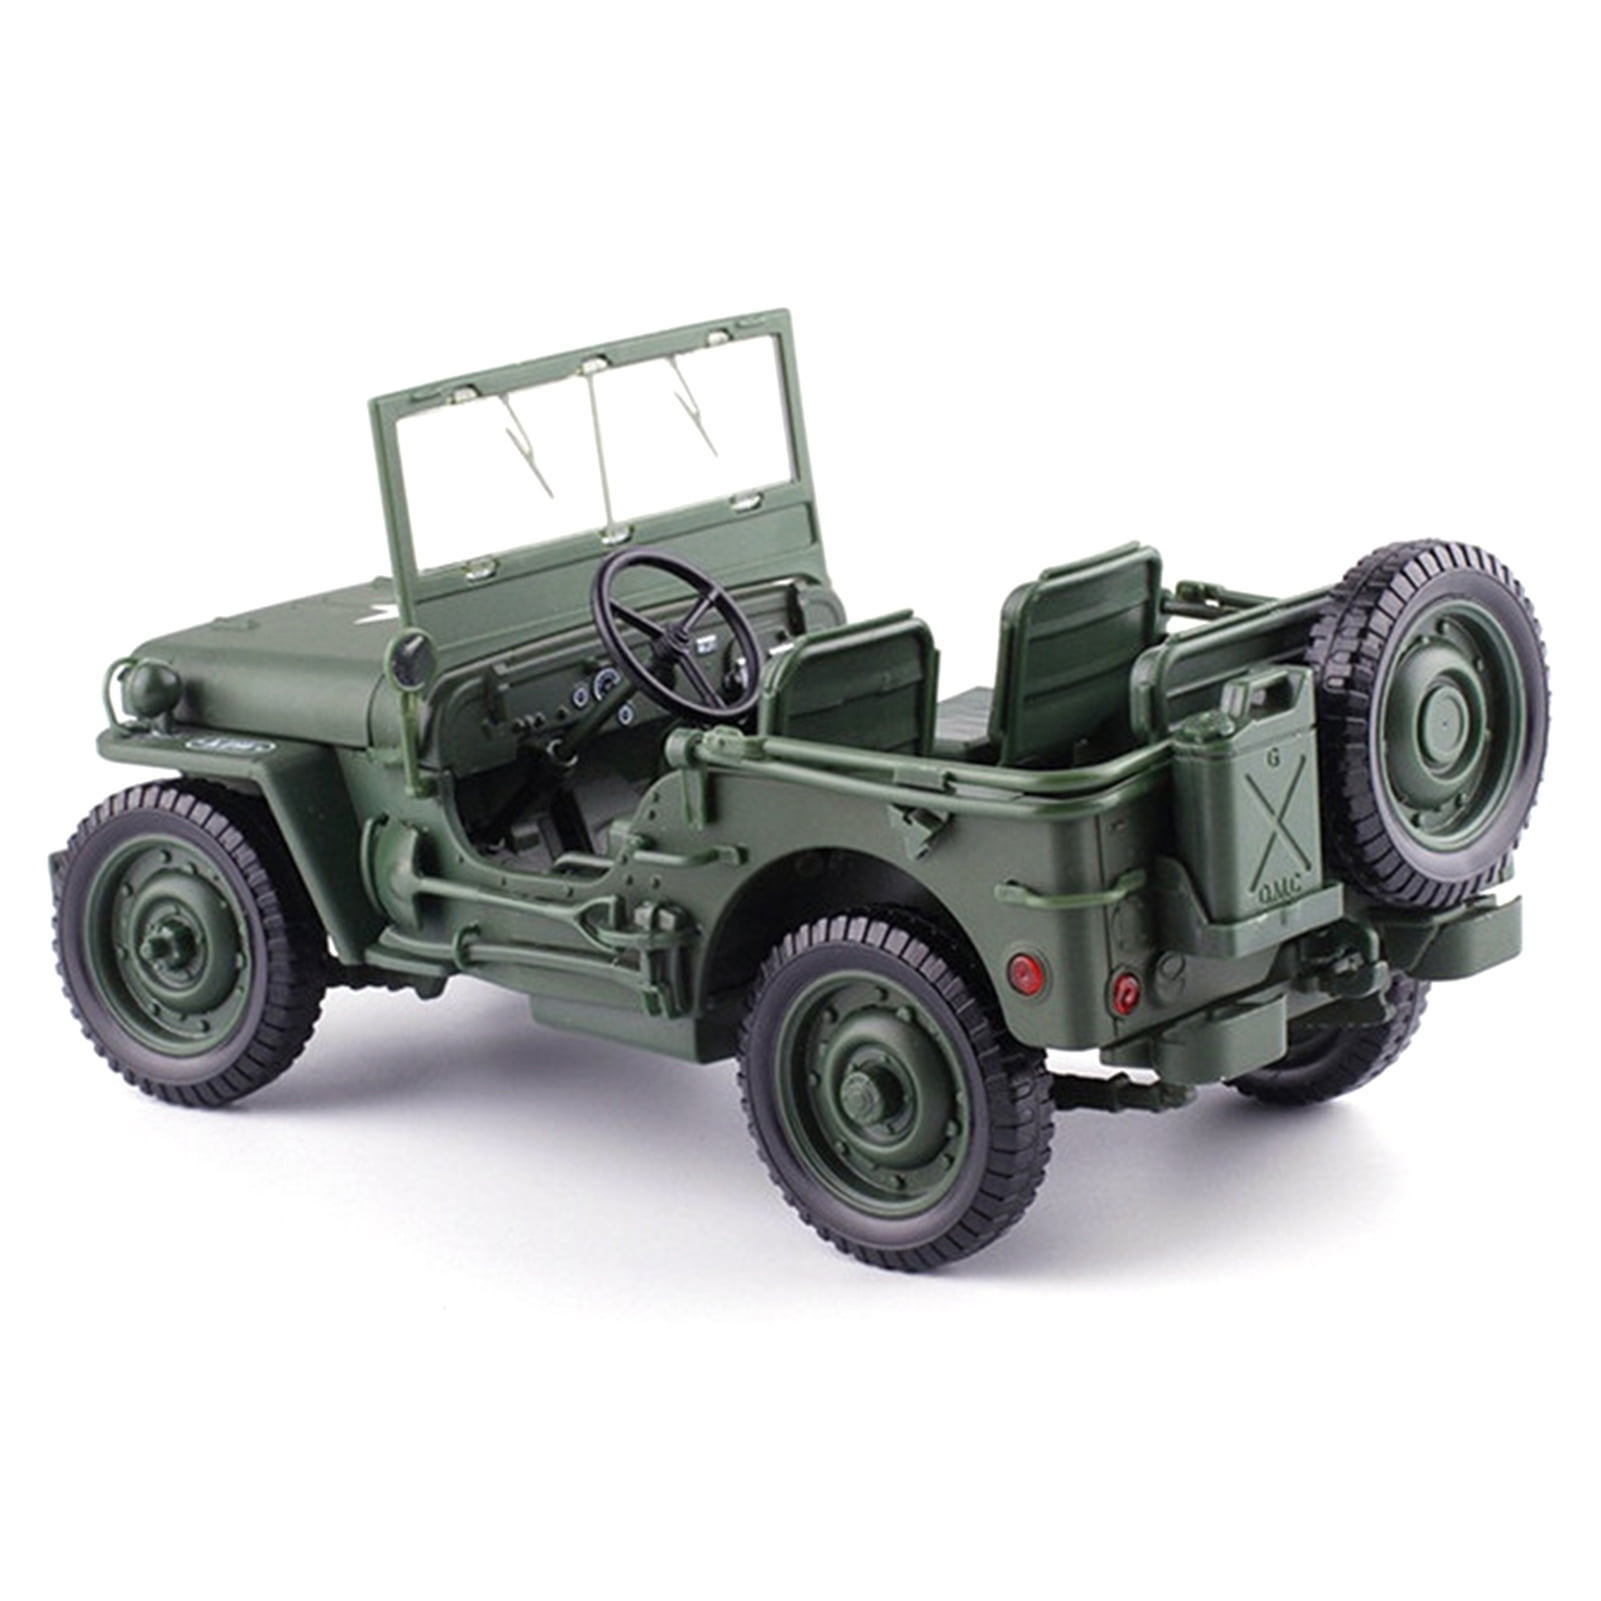 KDW 1/18 Scale Diecast Military Army Tactical Jeep Vehicle Model Toys 